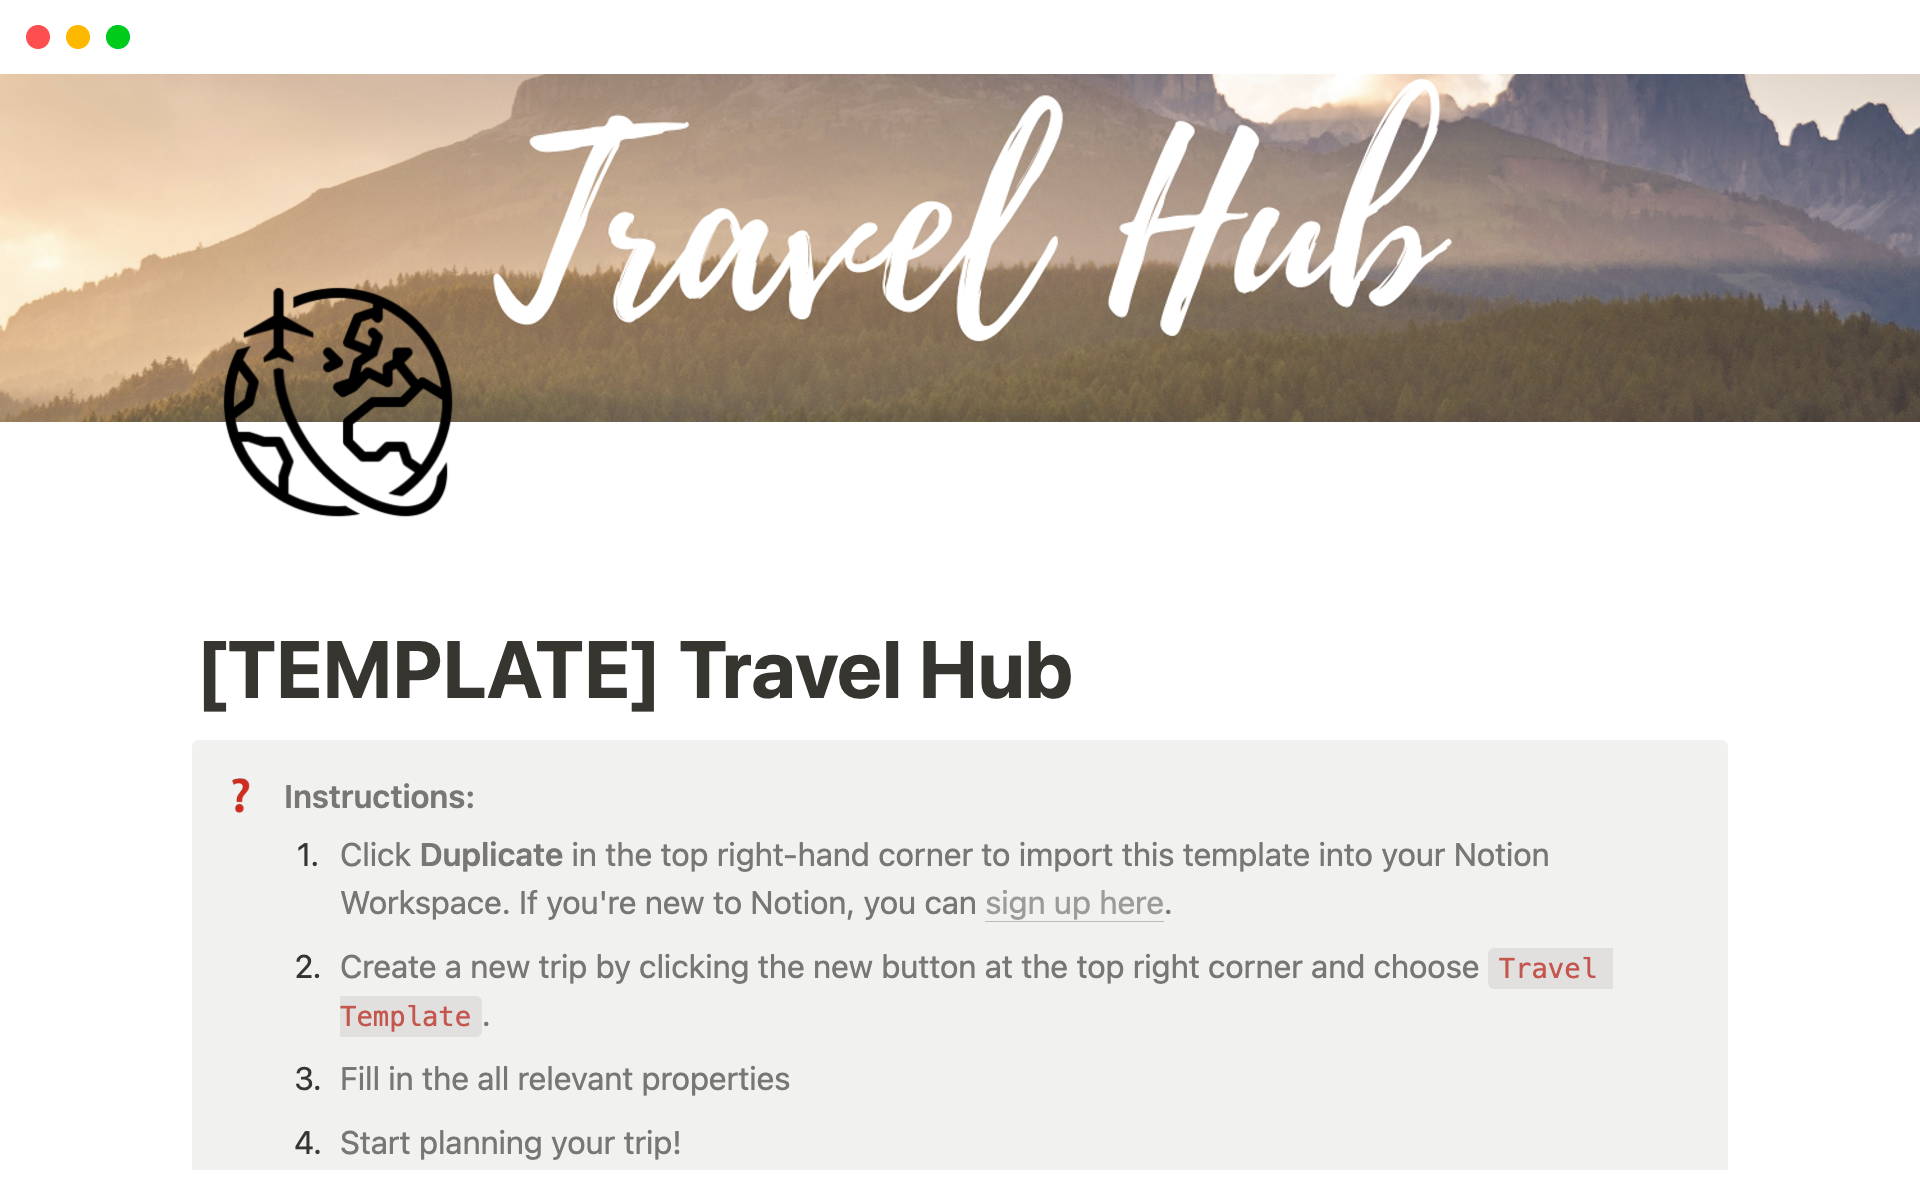 This Notion travel template helps you ideate, plan, research and organise your trip - so you can track everything in one place and move a place of mental clutter to a crystal clear plan!